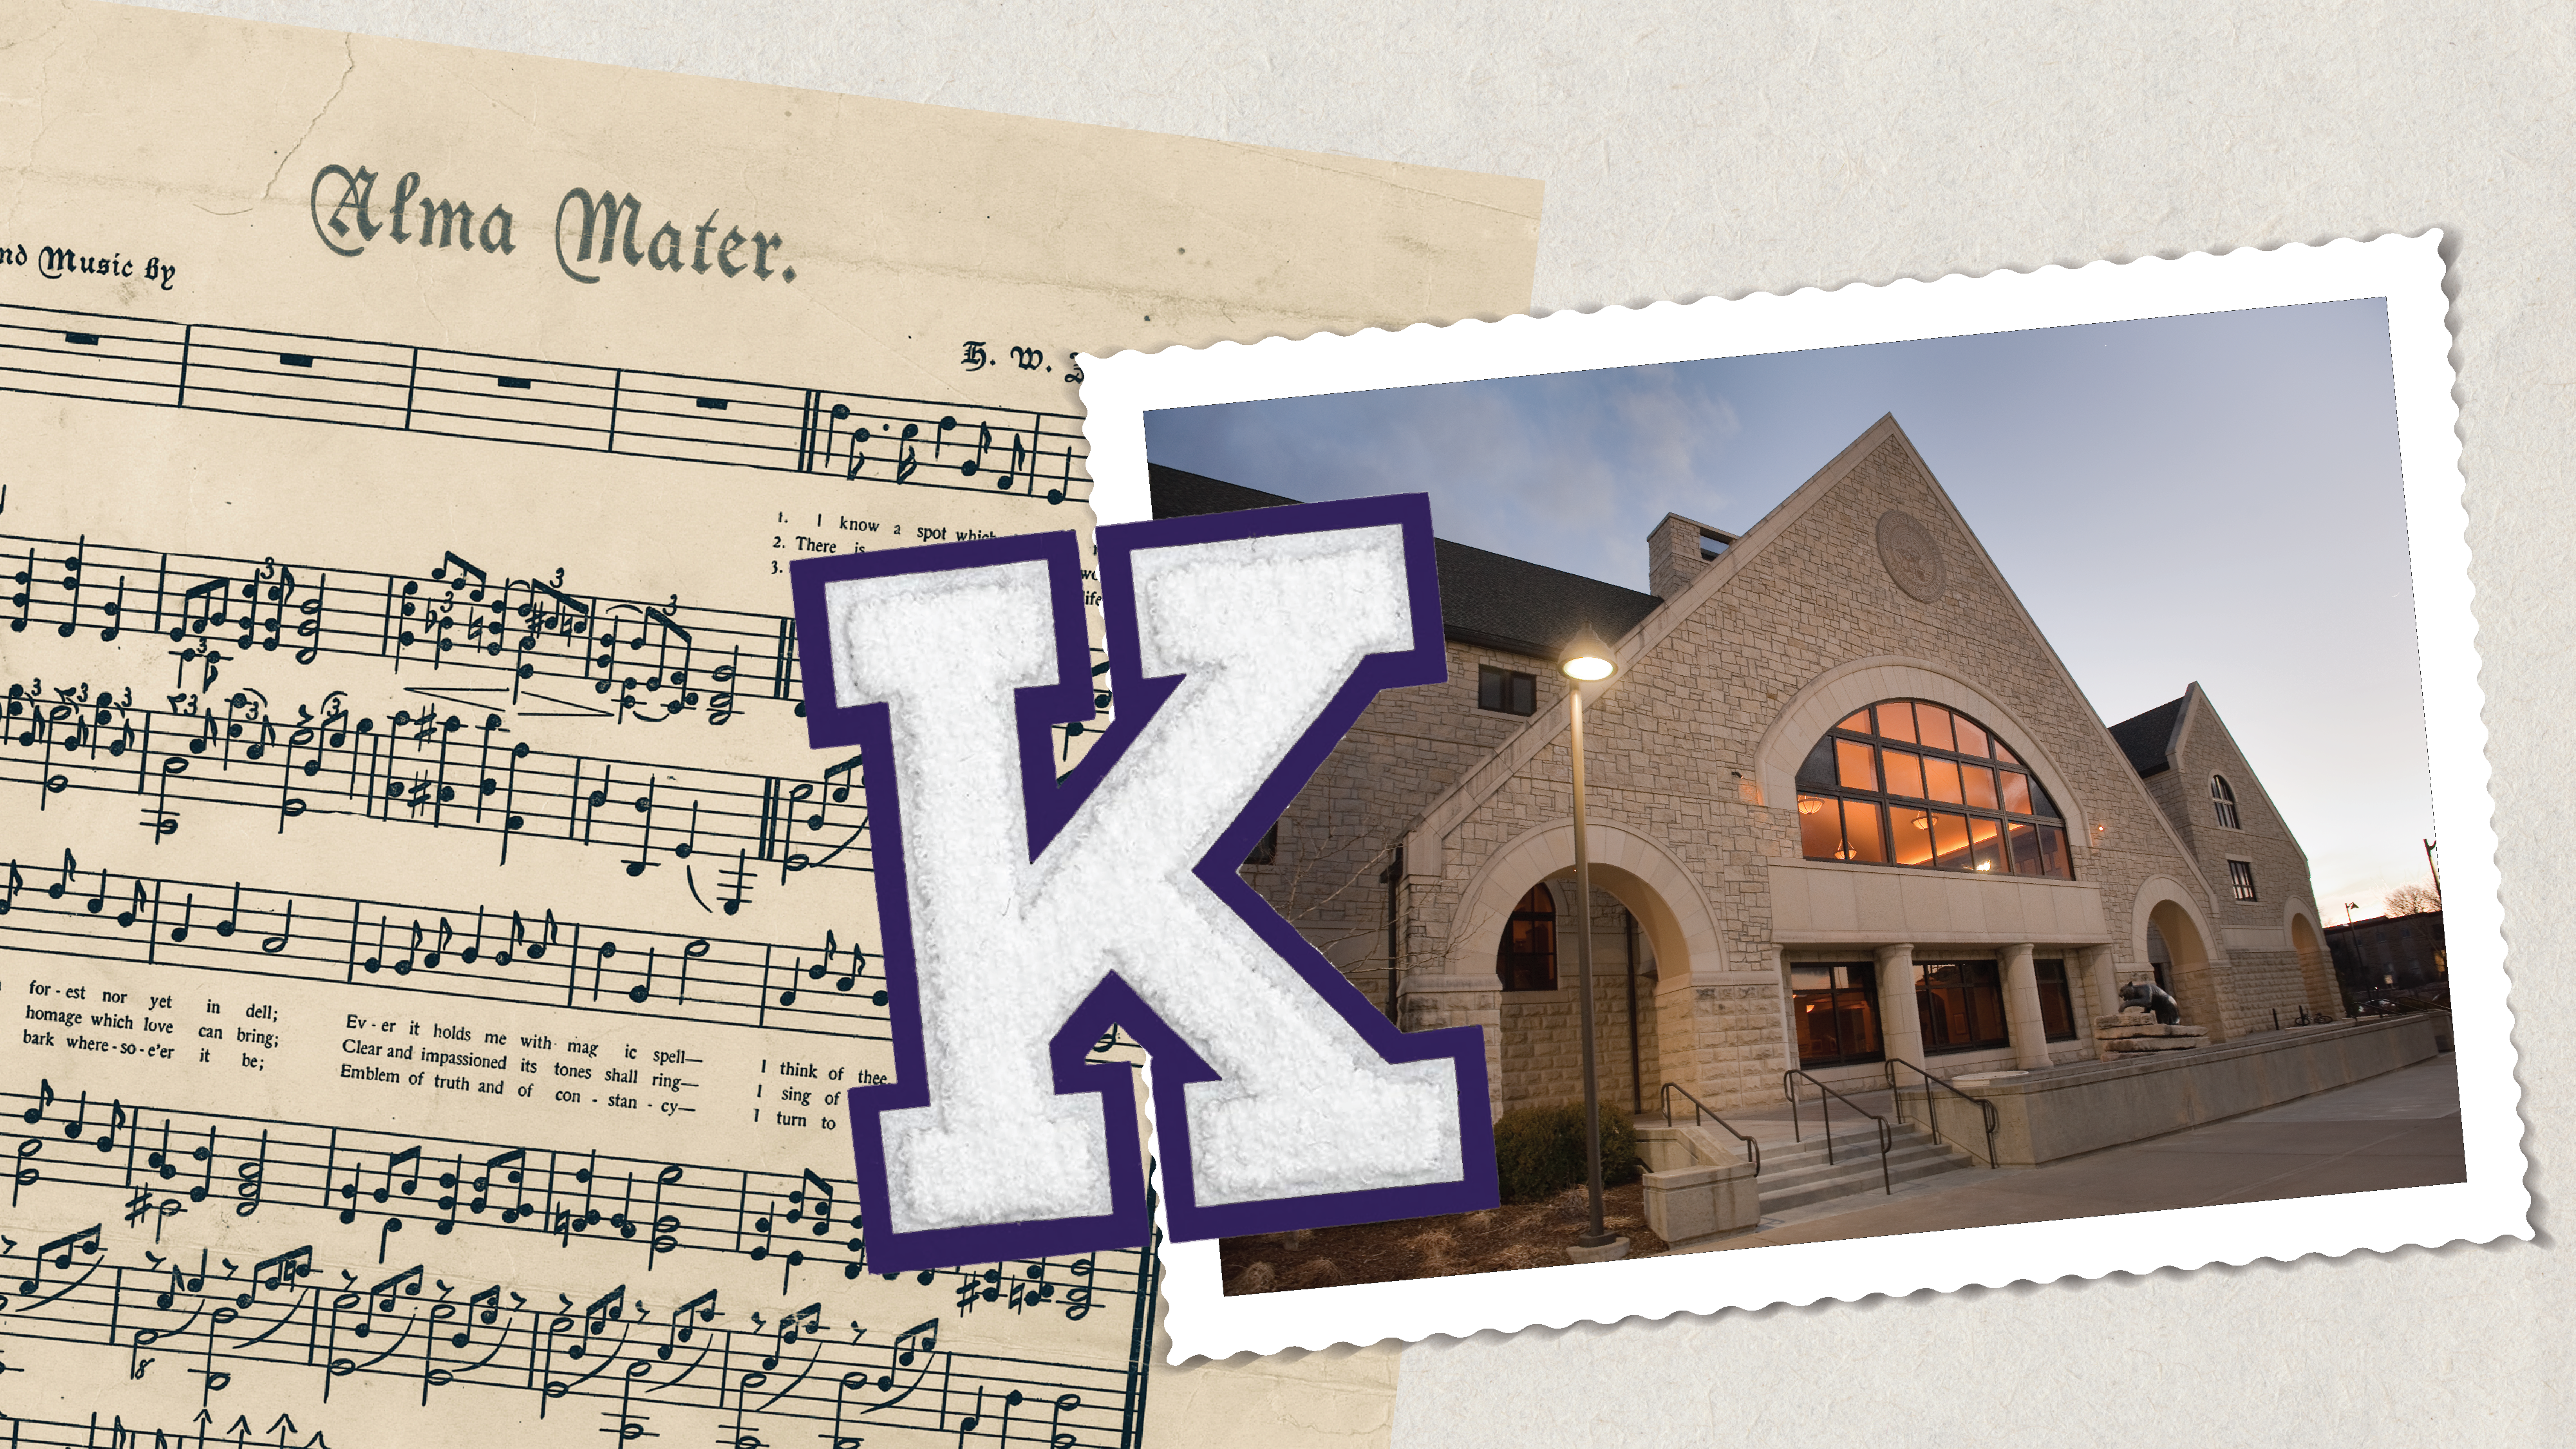 Alma Mater sheet music, a varsity letter K and a photo of the K-State Alumni Center